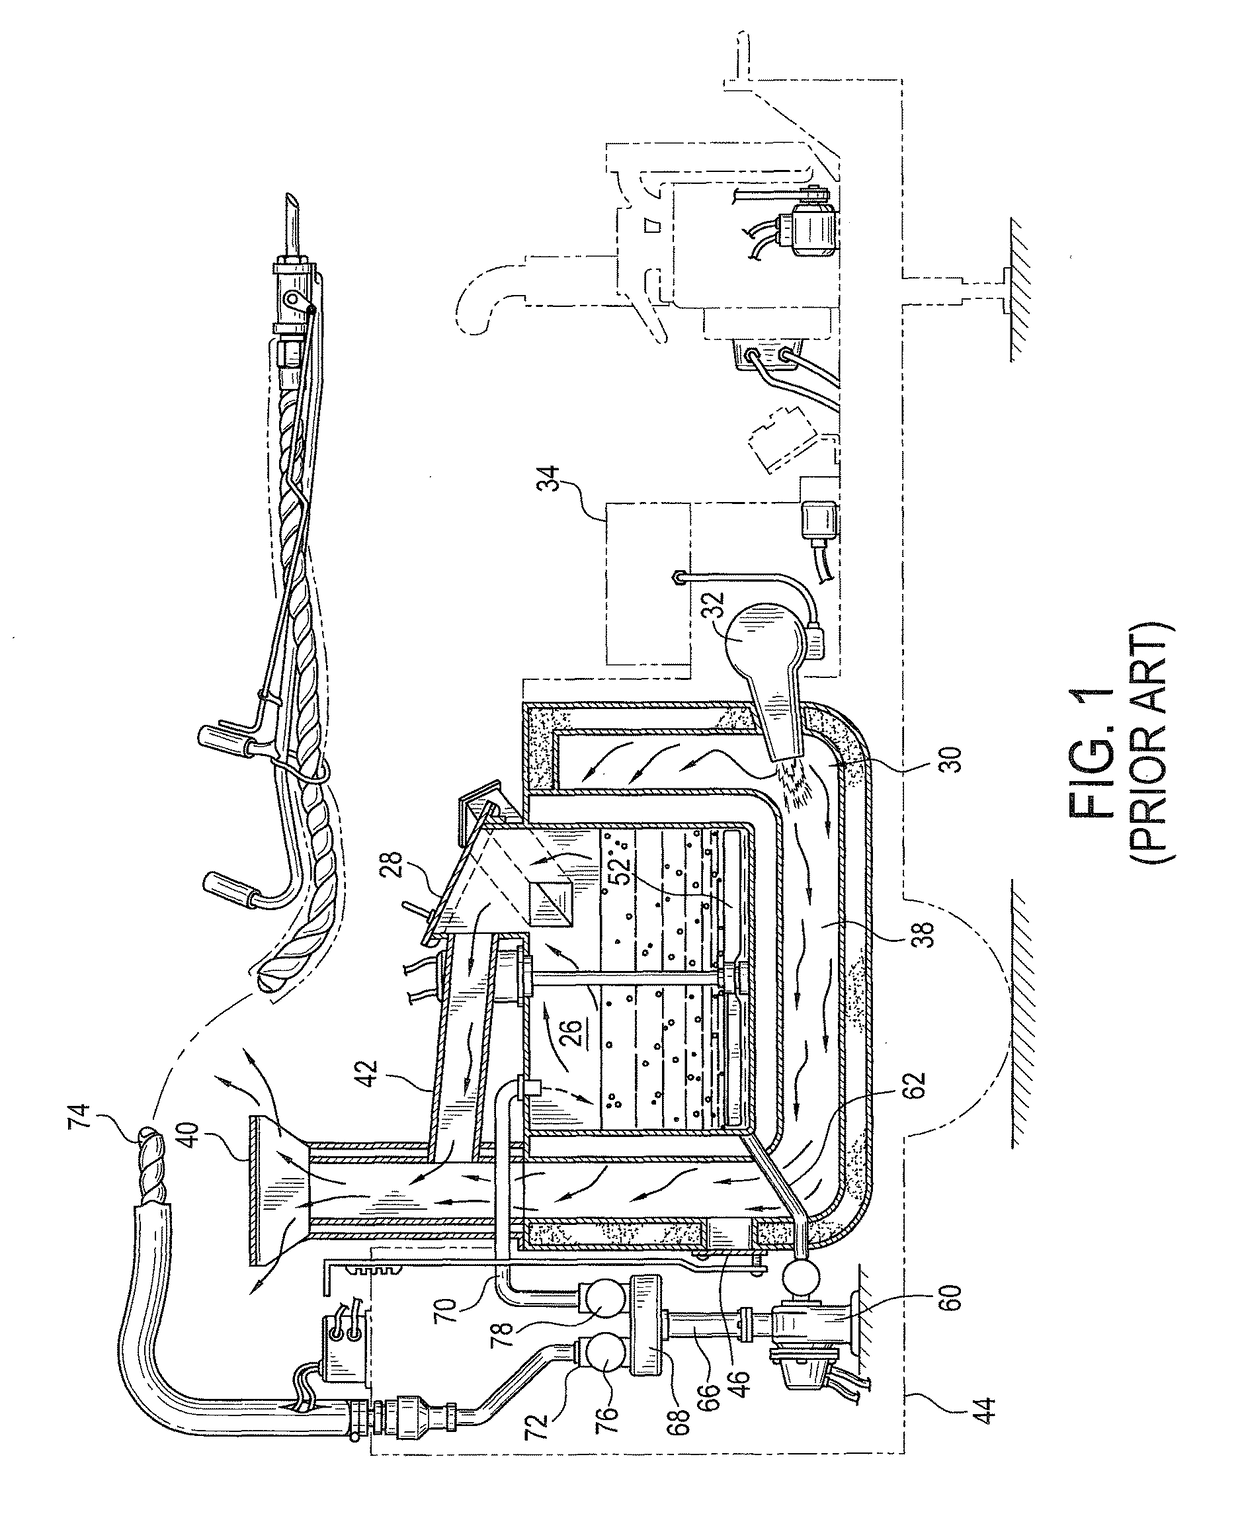 Integral melter and pump system for the application of bituminous adhesives and highway crack-sealing materials, and a method of making the same